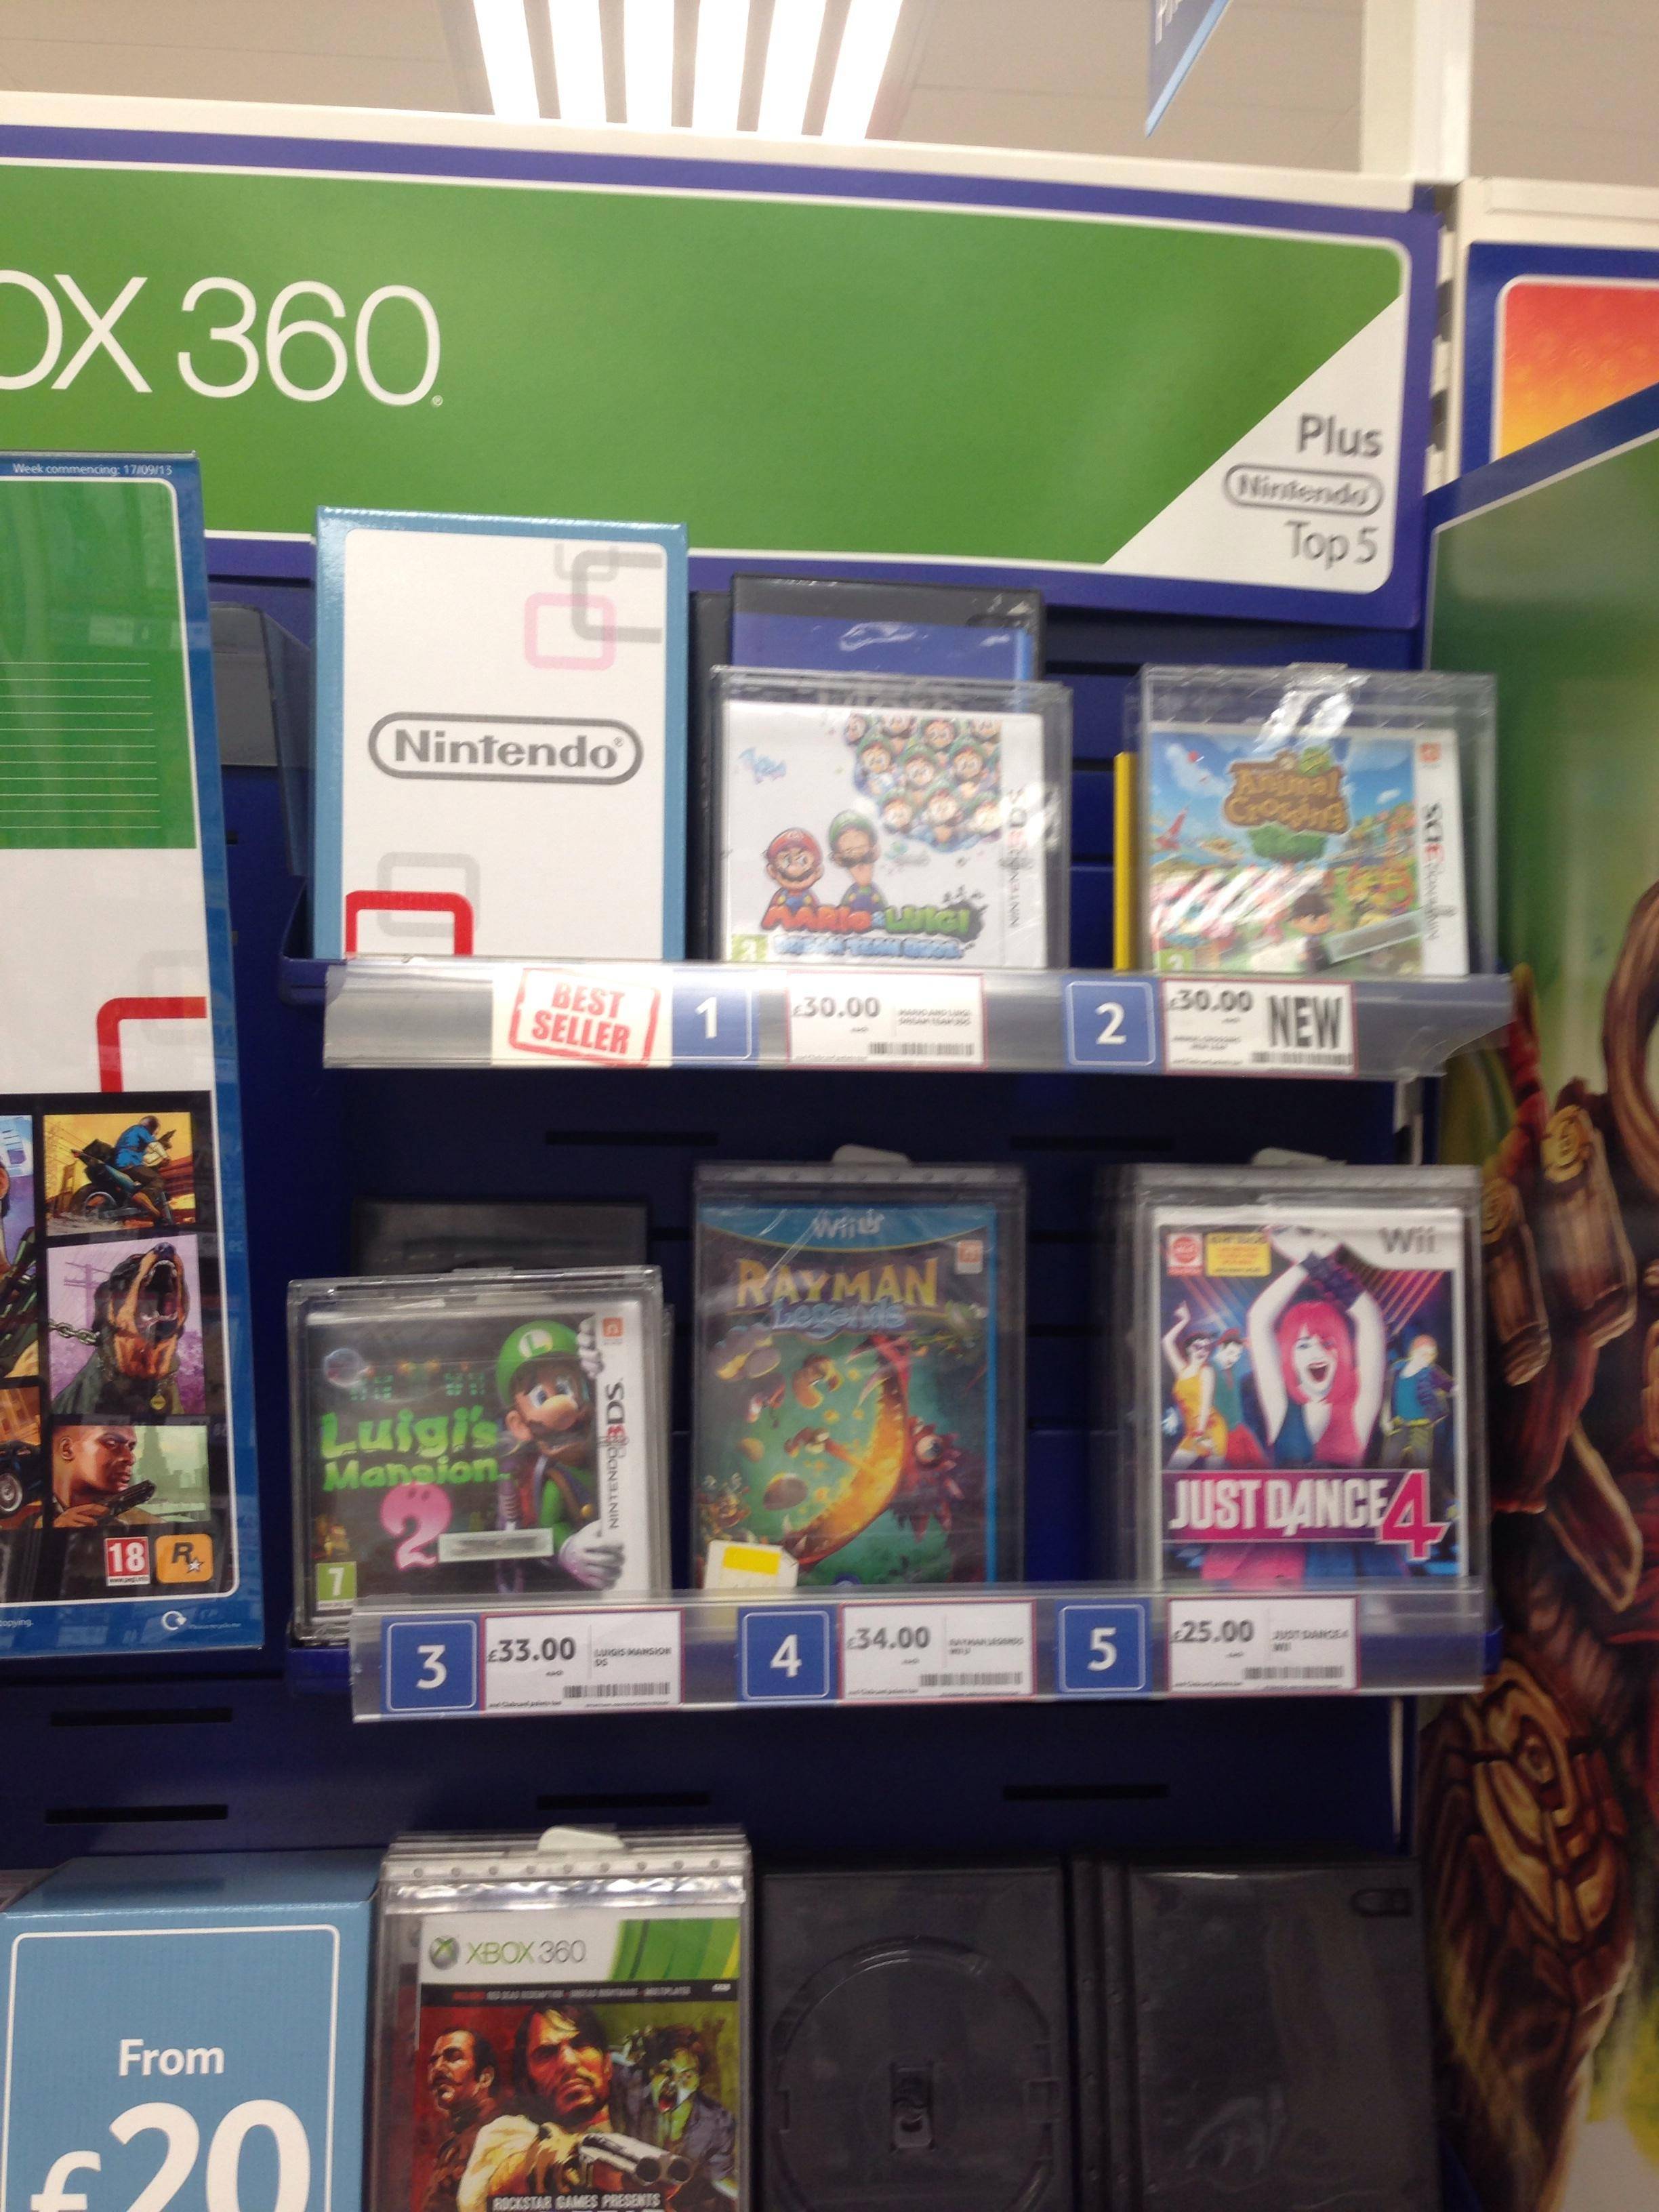 Nintendo Shelf Space Severely Reduced in Tesco The UK's Largest Supermarket  - My Nintendo News